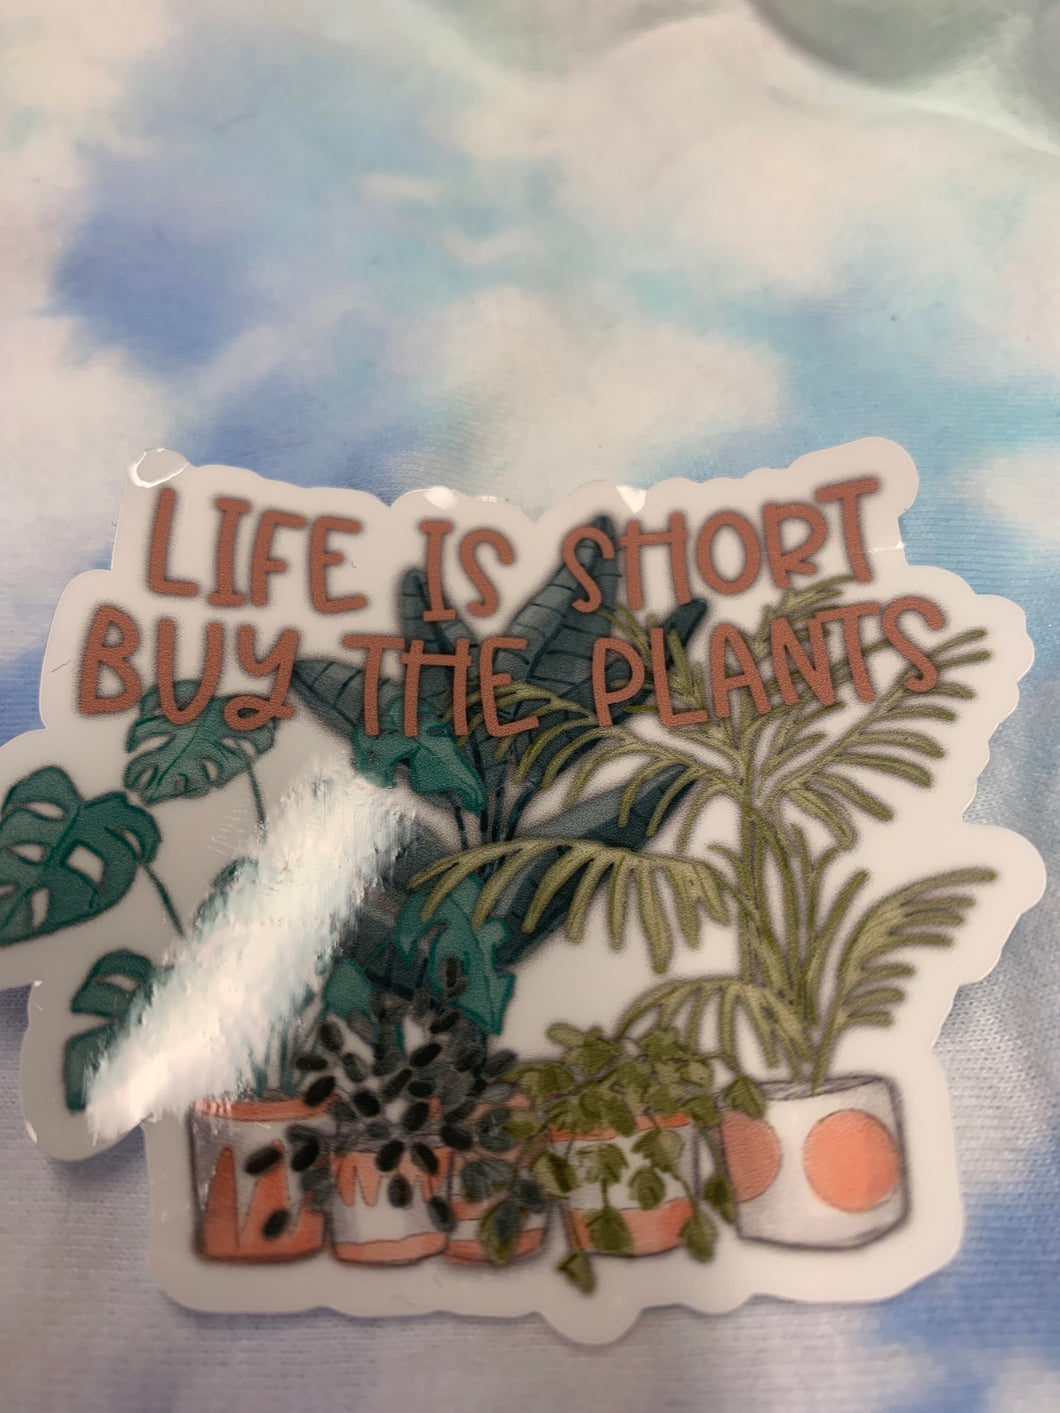 Life is short by the plants free shipping vinyl - Main glitter site 